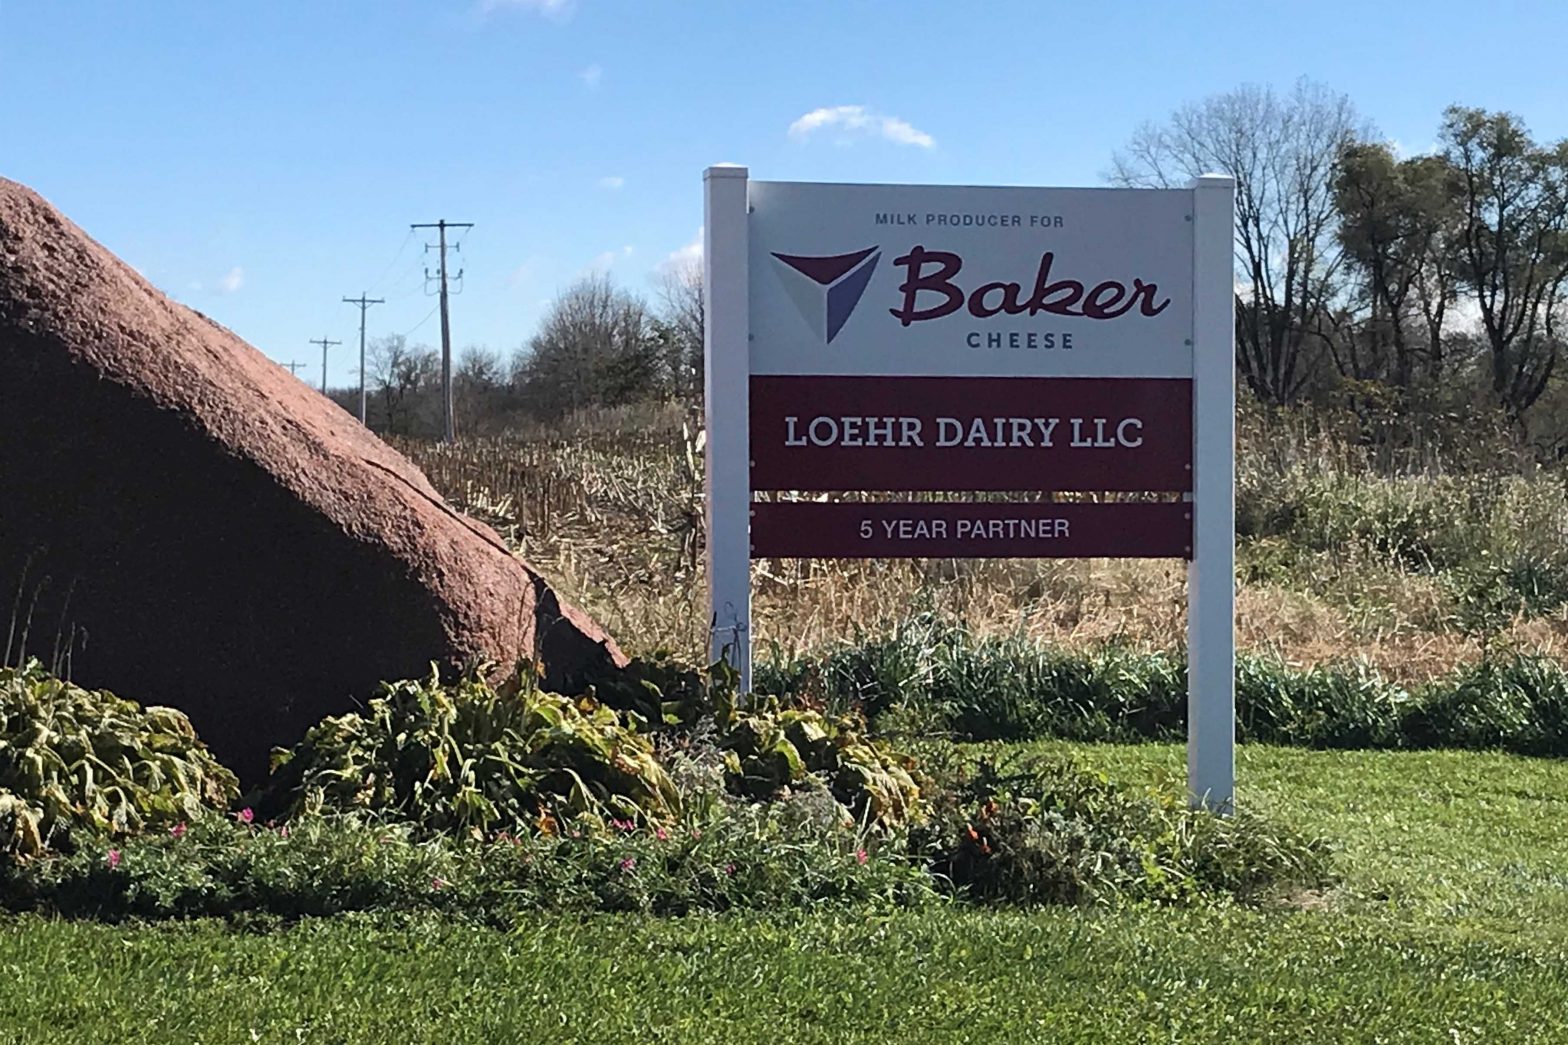 Loehr Dairy LLC in Mt. Calvary, Wisconsin is owned in partnership between brothers Joe, Mark and Dan Loehr.  The farm currently milks 540 cows and has been in the family for more than 135 years.